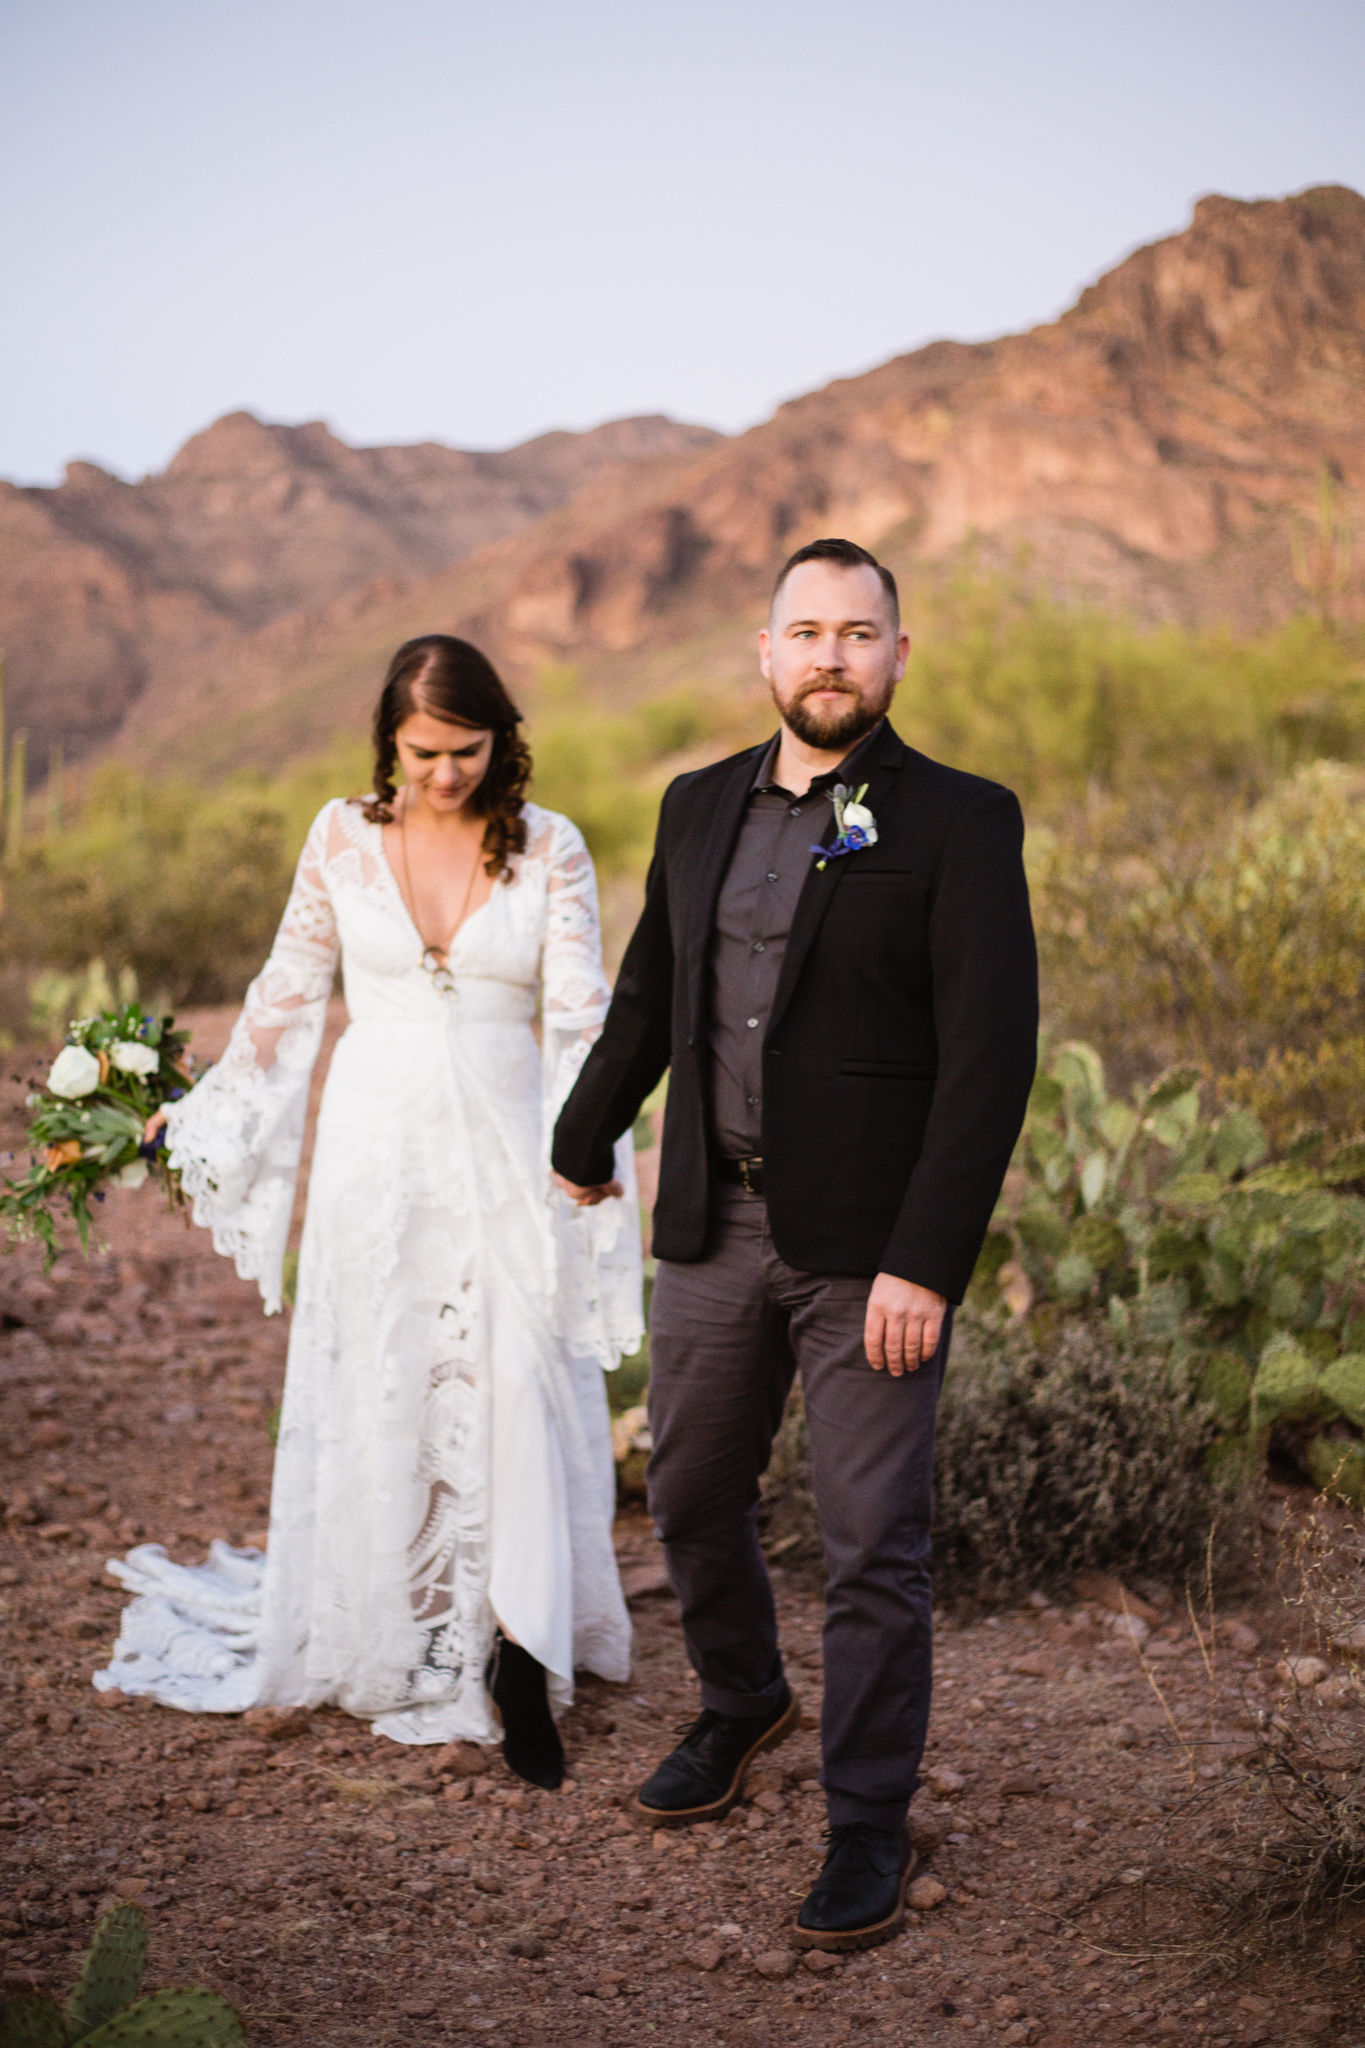 Witchy bohemian black white and gold inspired groom leading bride down trail at a Superstition Mountains styled wedding surrounded by the beauty of the desert.